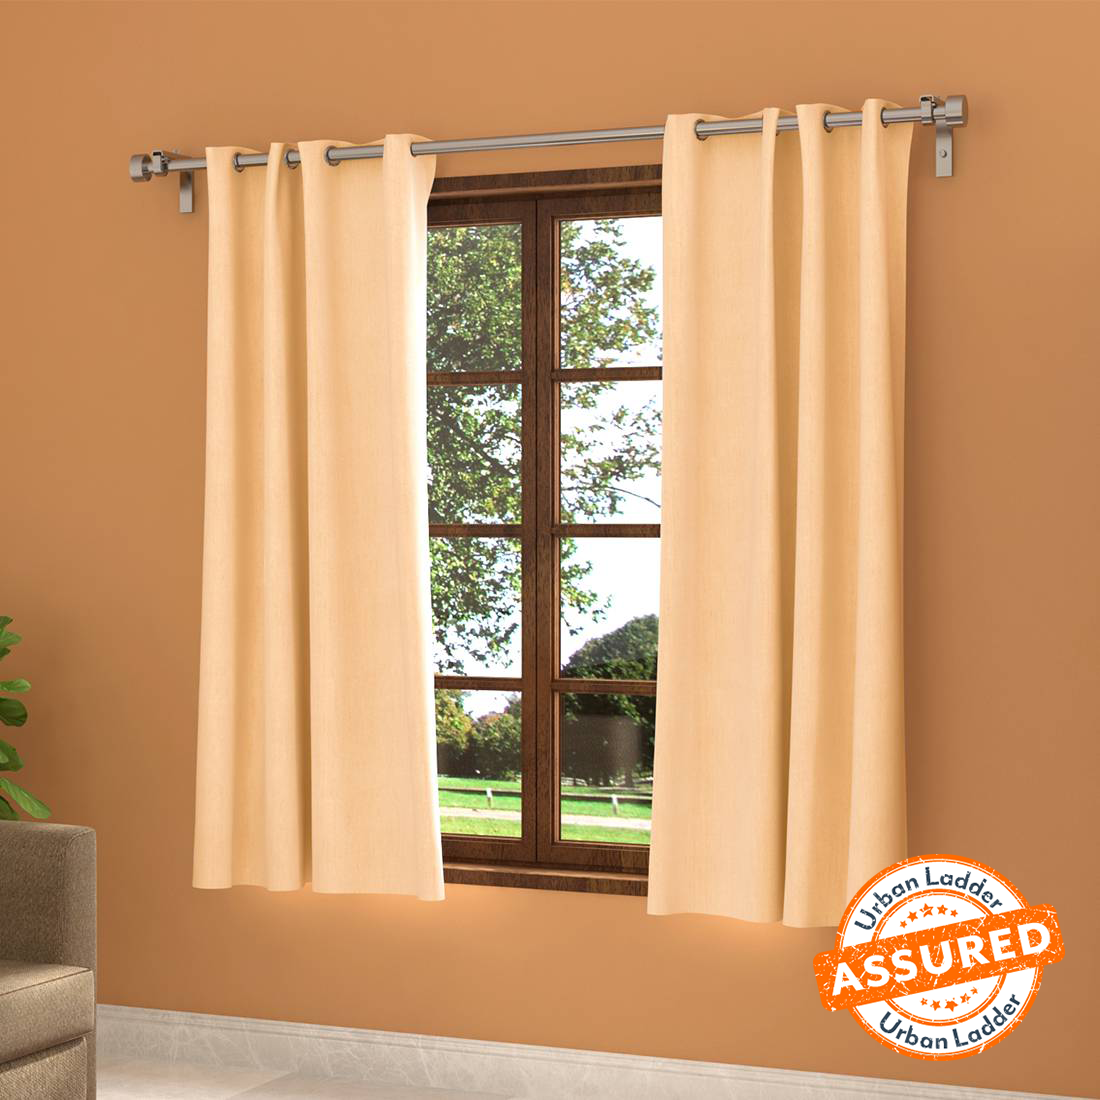 Buy Window Curtains Online and Get up to 50% Off